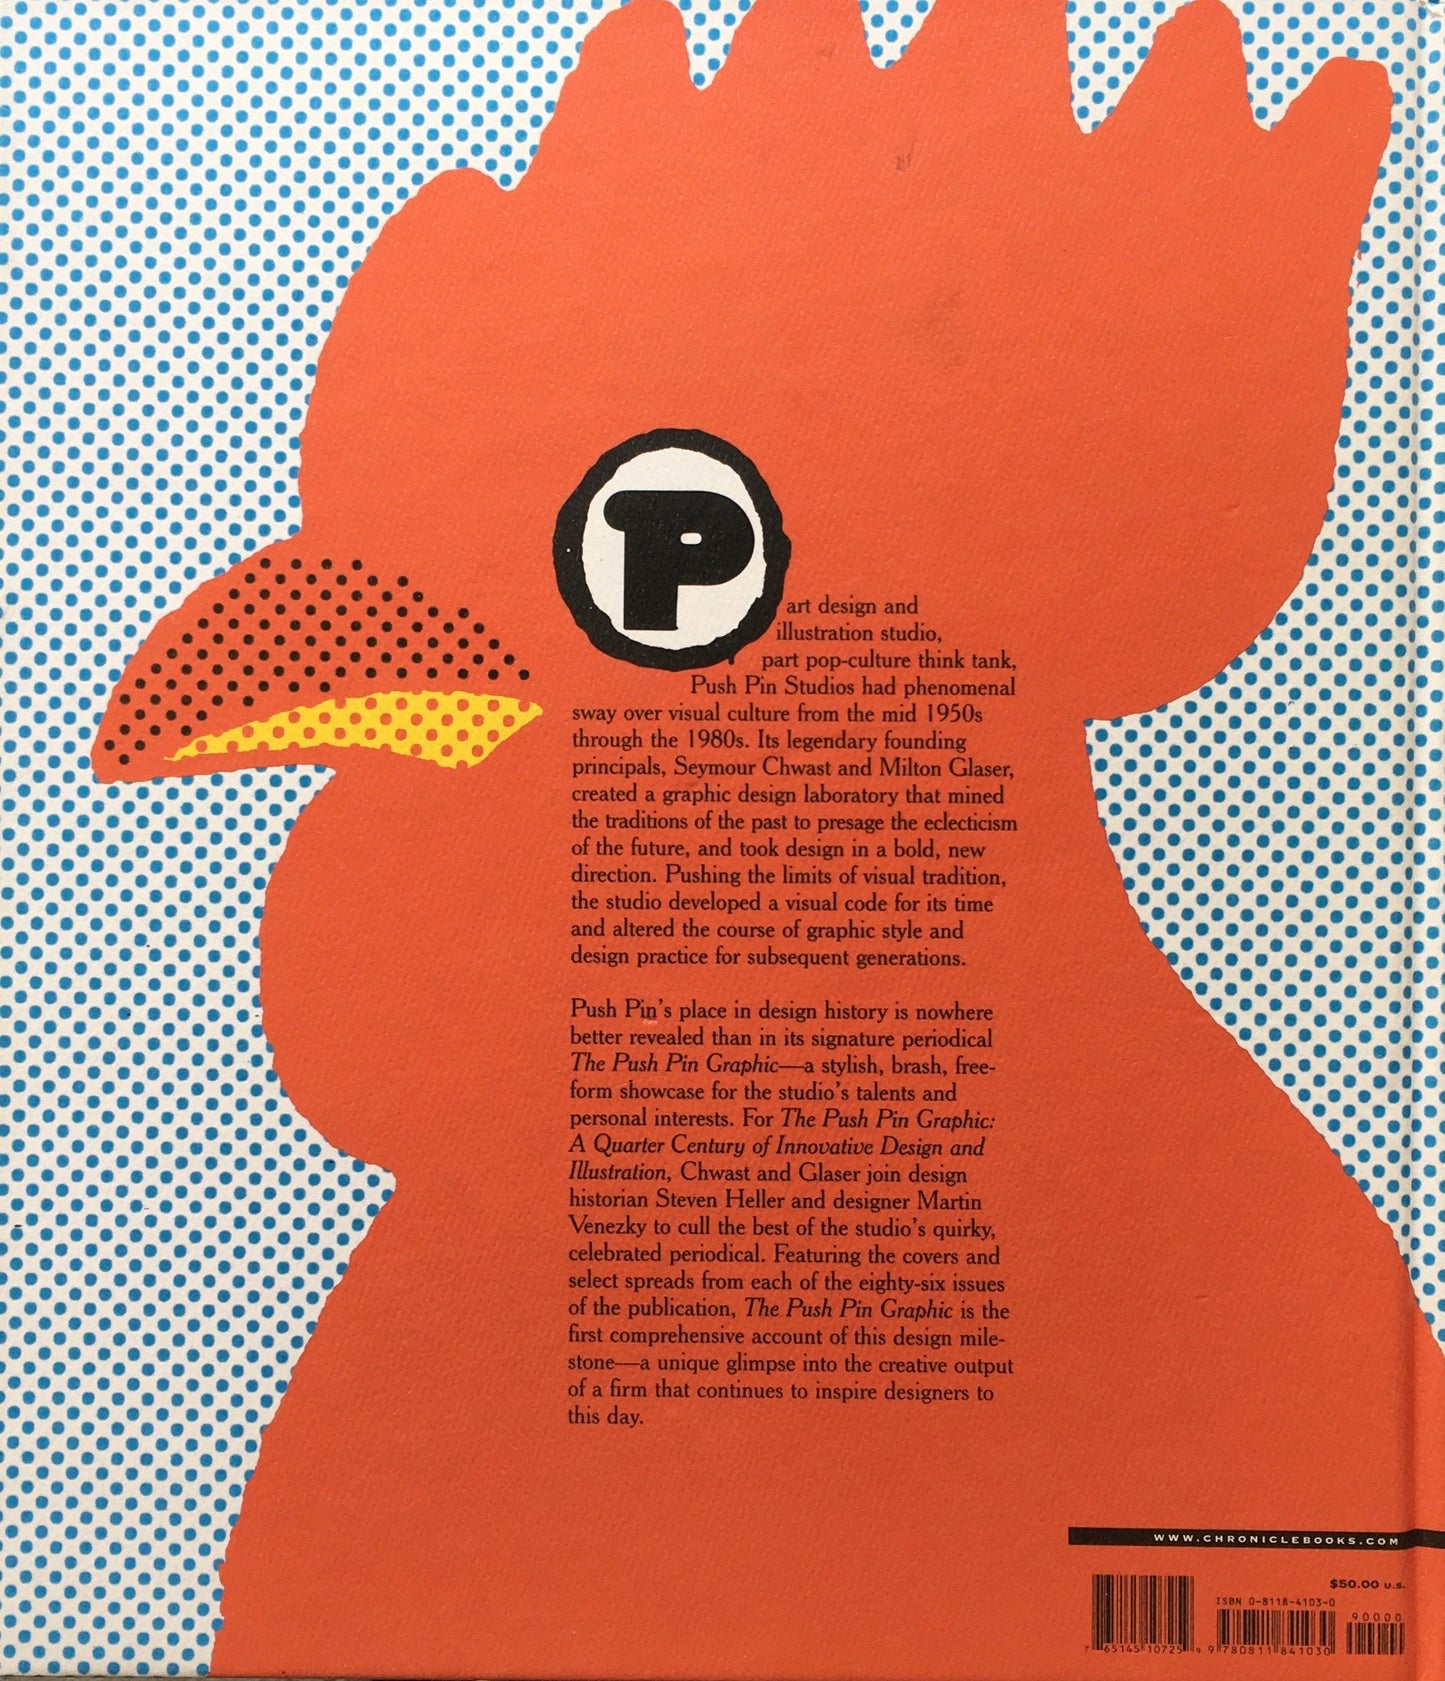 THE PUSH PIN GRAPHIC A Quarter Century of Innovative Design and Illustration